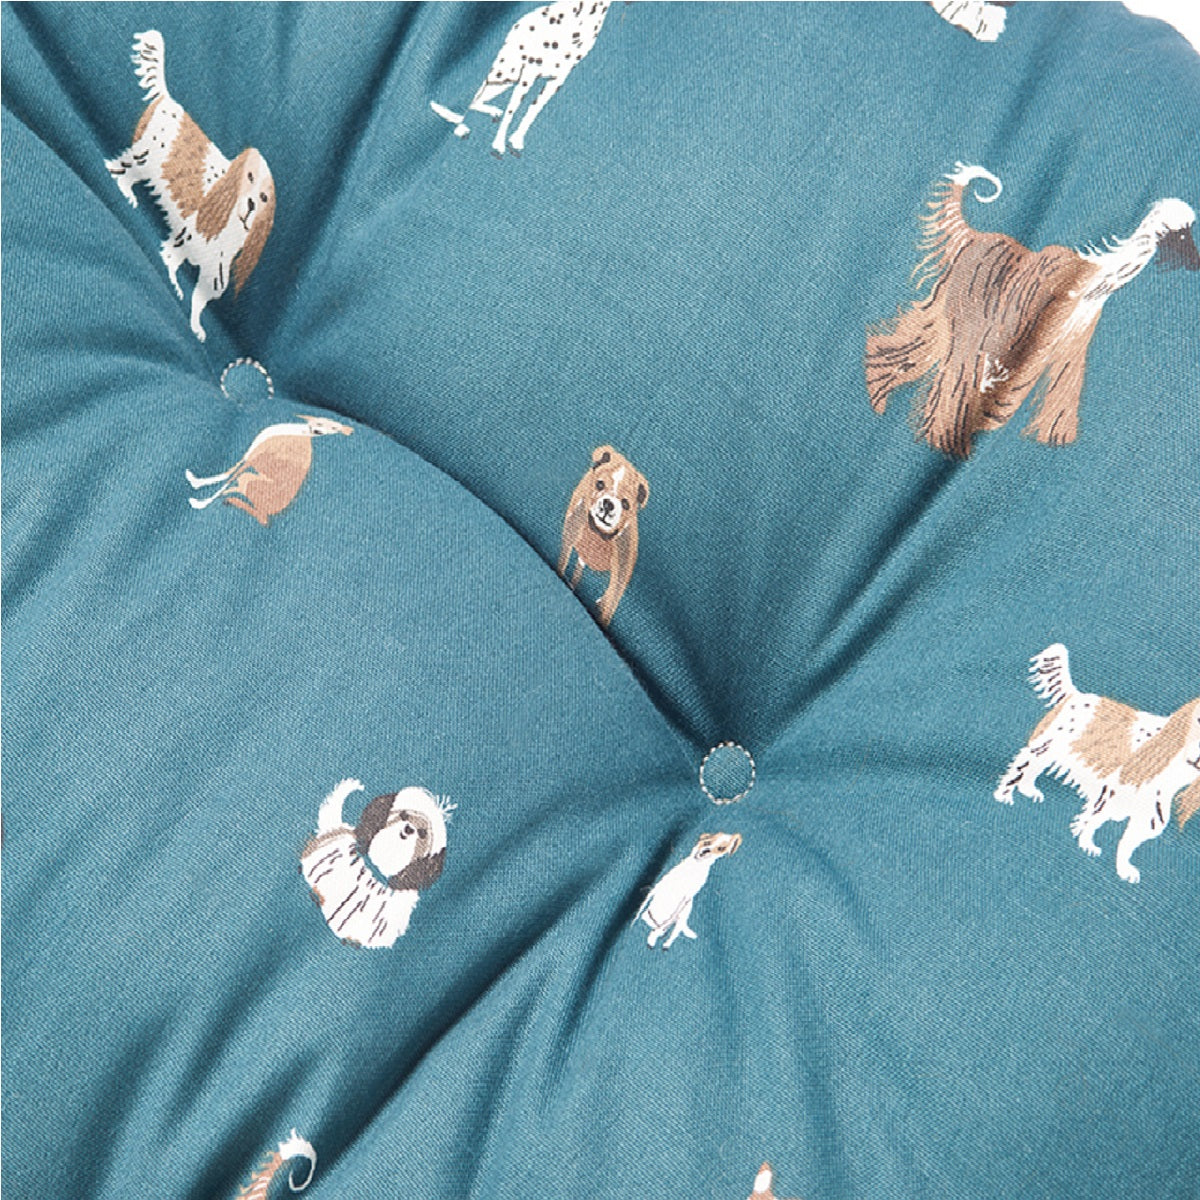 Laura Ashley - Park Dogs Deluxe Slumber Bed